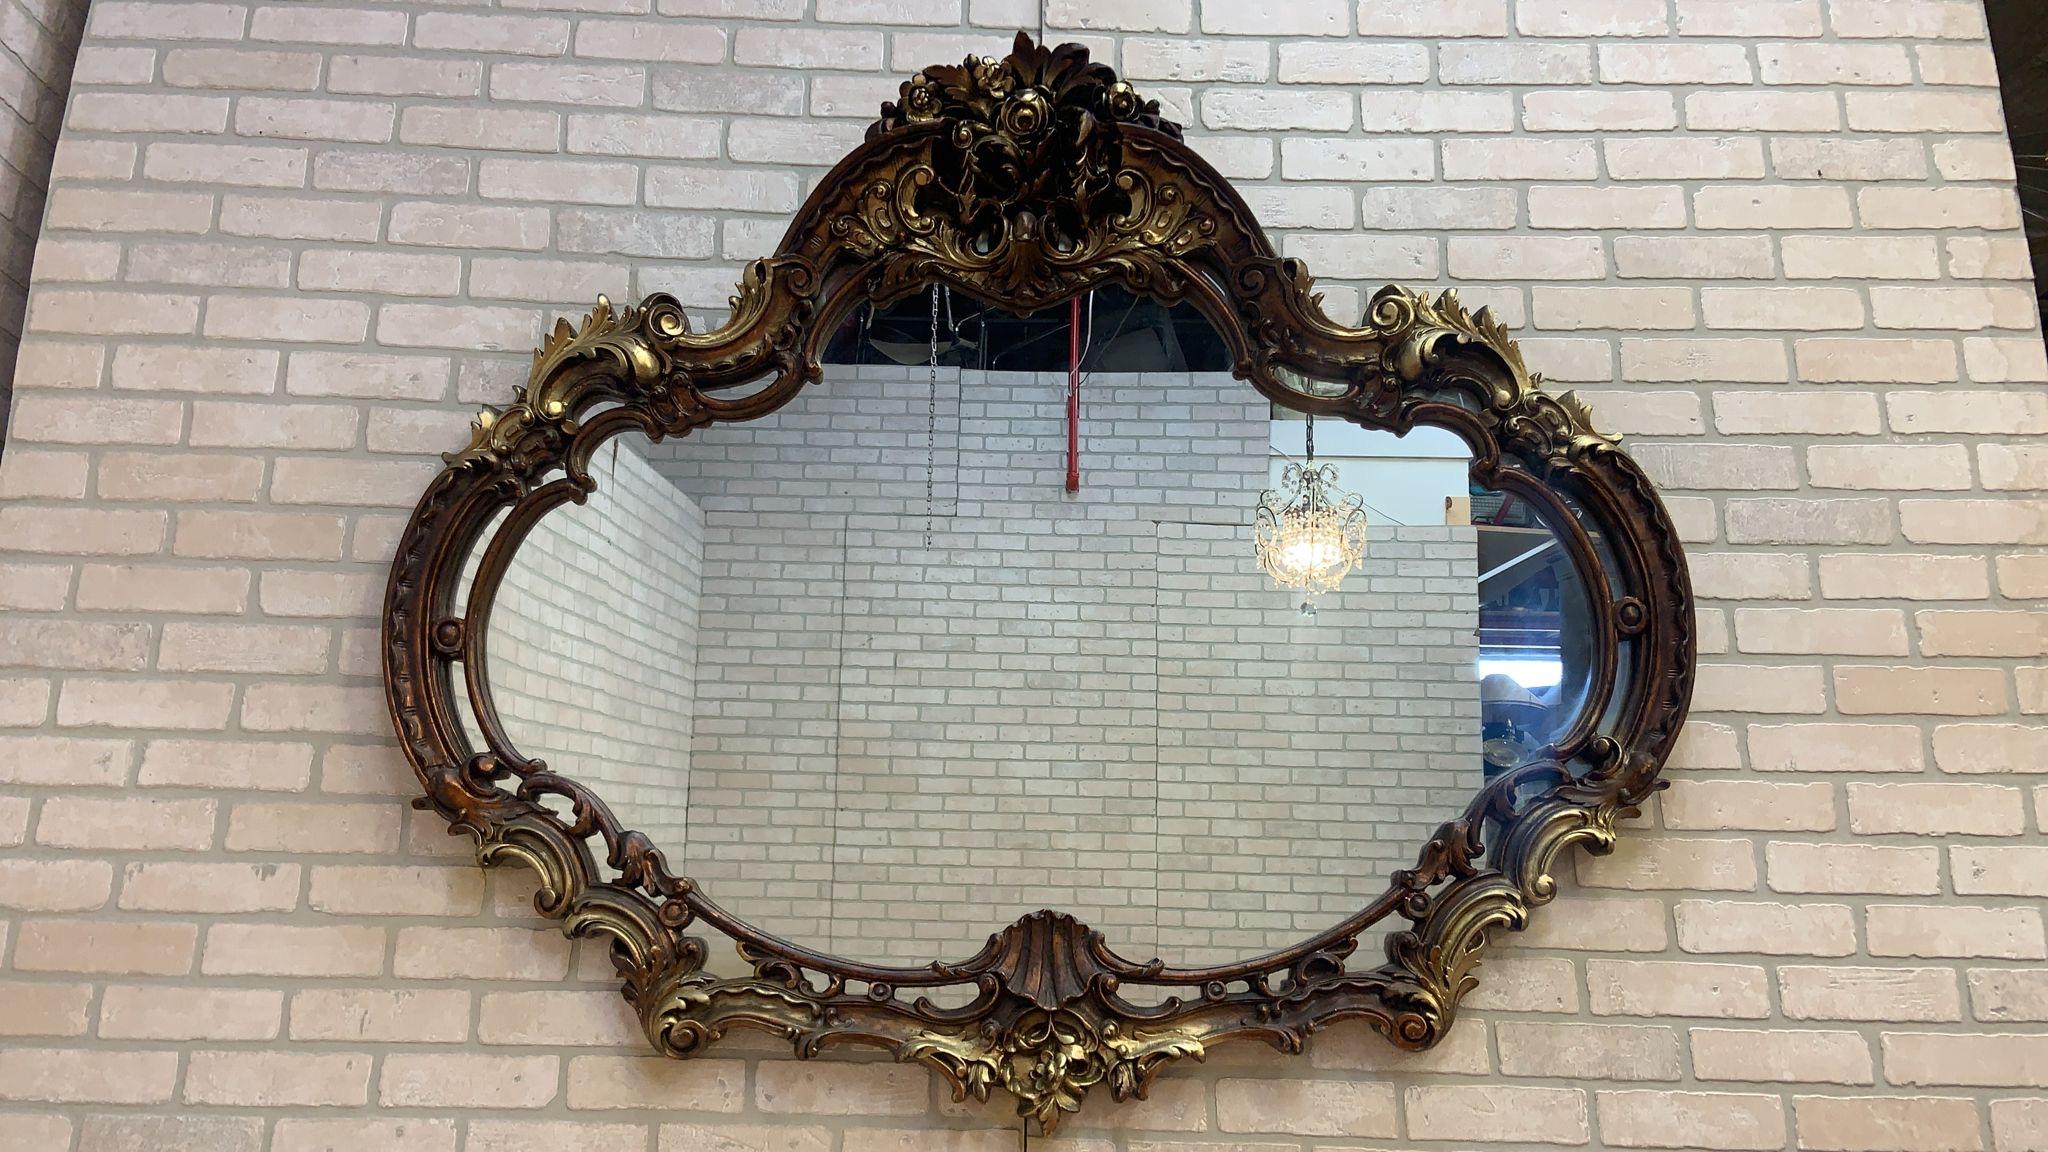 Vintage Rococo Revival Style Wall Mirror (Gips) im Angebot